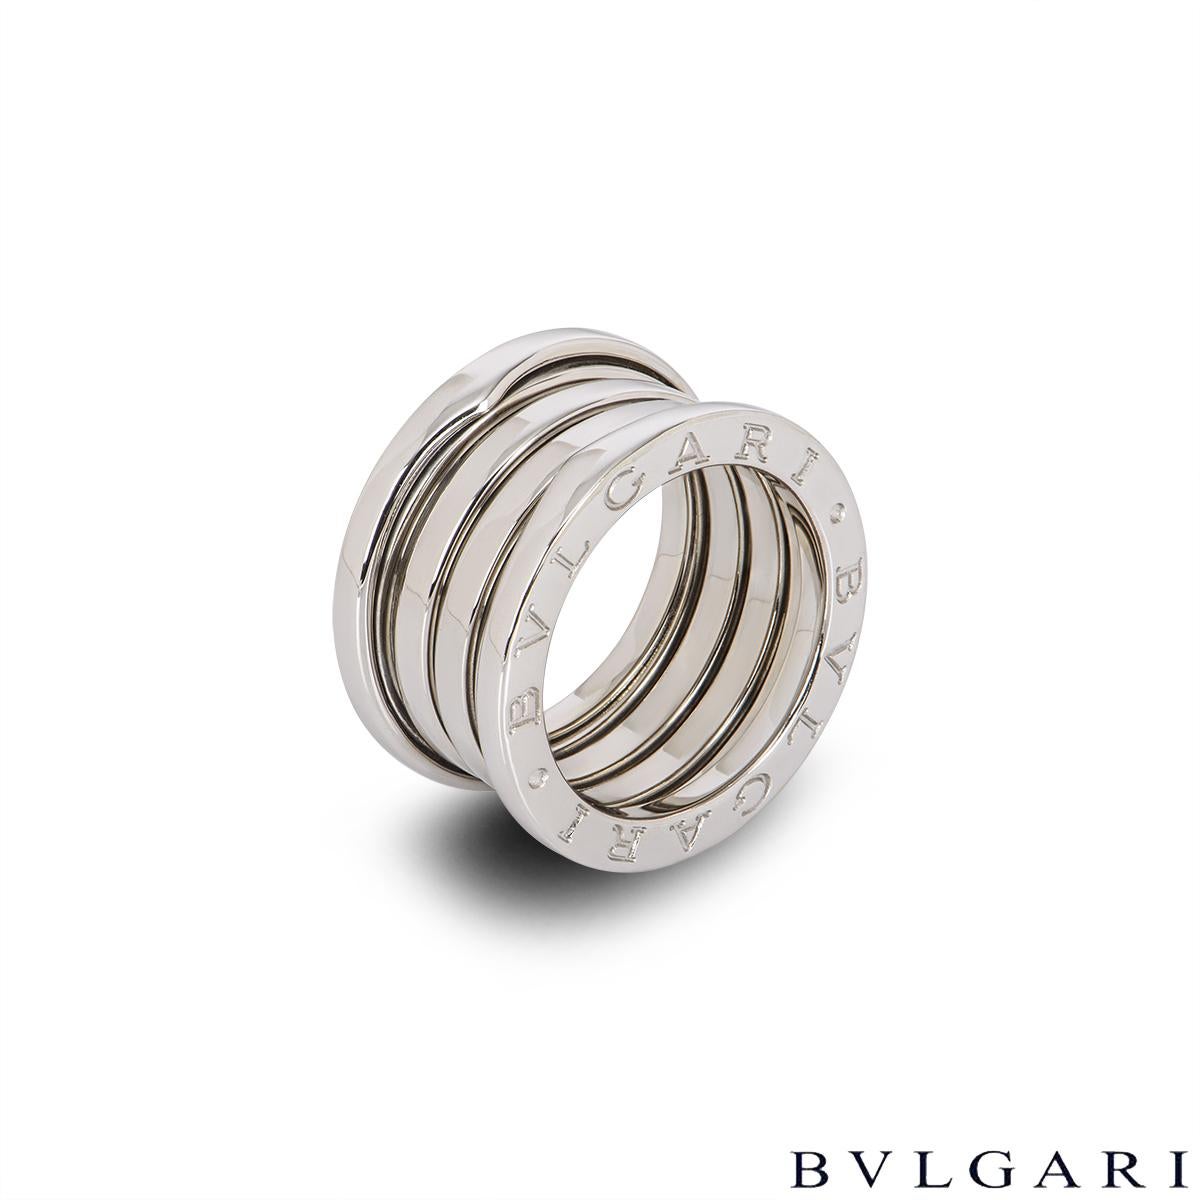 A classic 18k white gold ring by Bvlgari. from the B.Zero1 collection. Comprising of 3 spiral design bands with the iconic 'BVLGARI BVLGARI' logo engraved around the outer edges. This ring is a size UK M - EU 52 and has a gross weight of 10.74